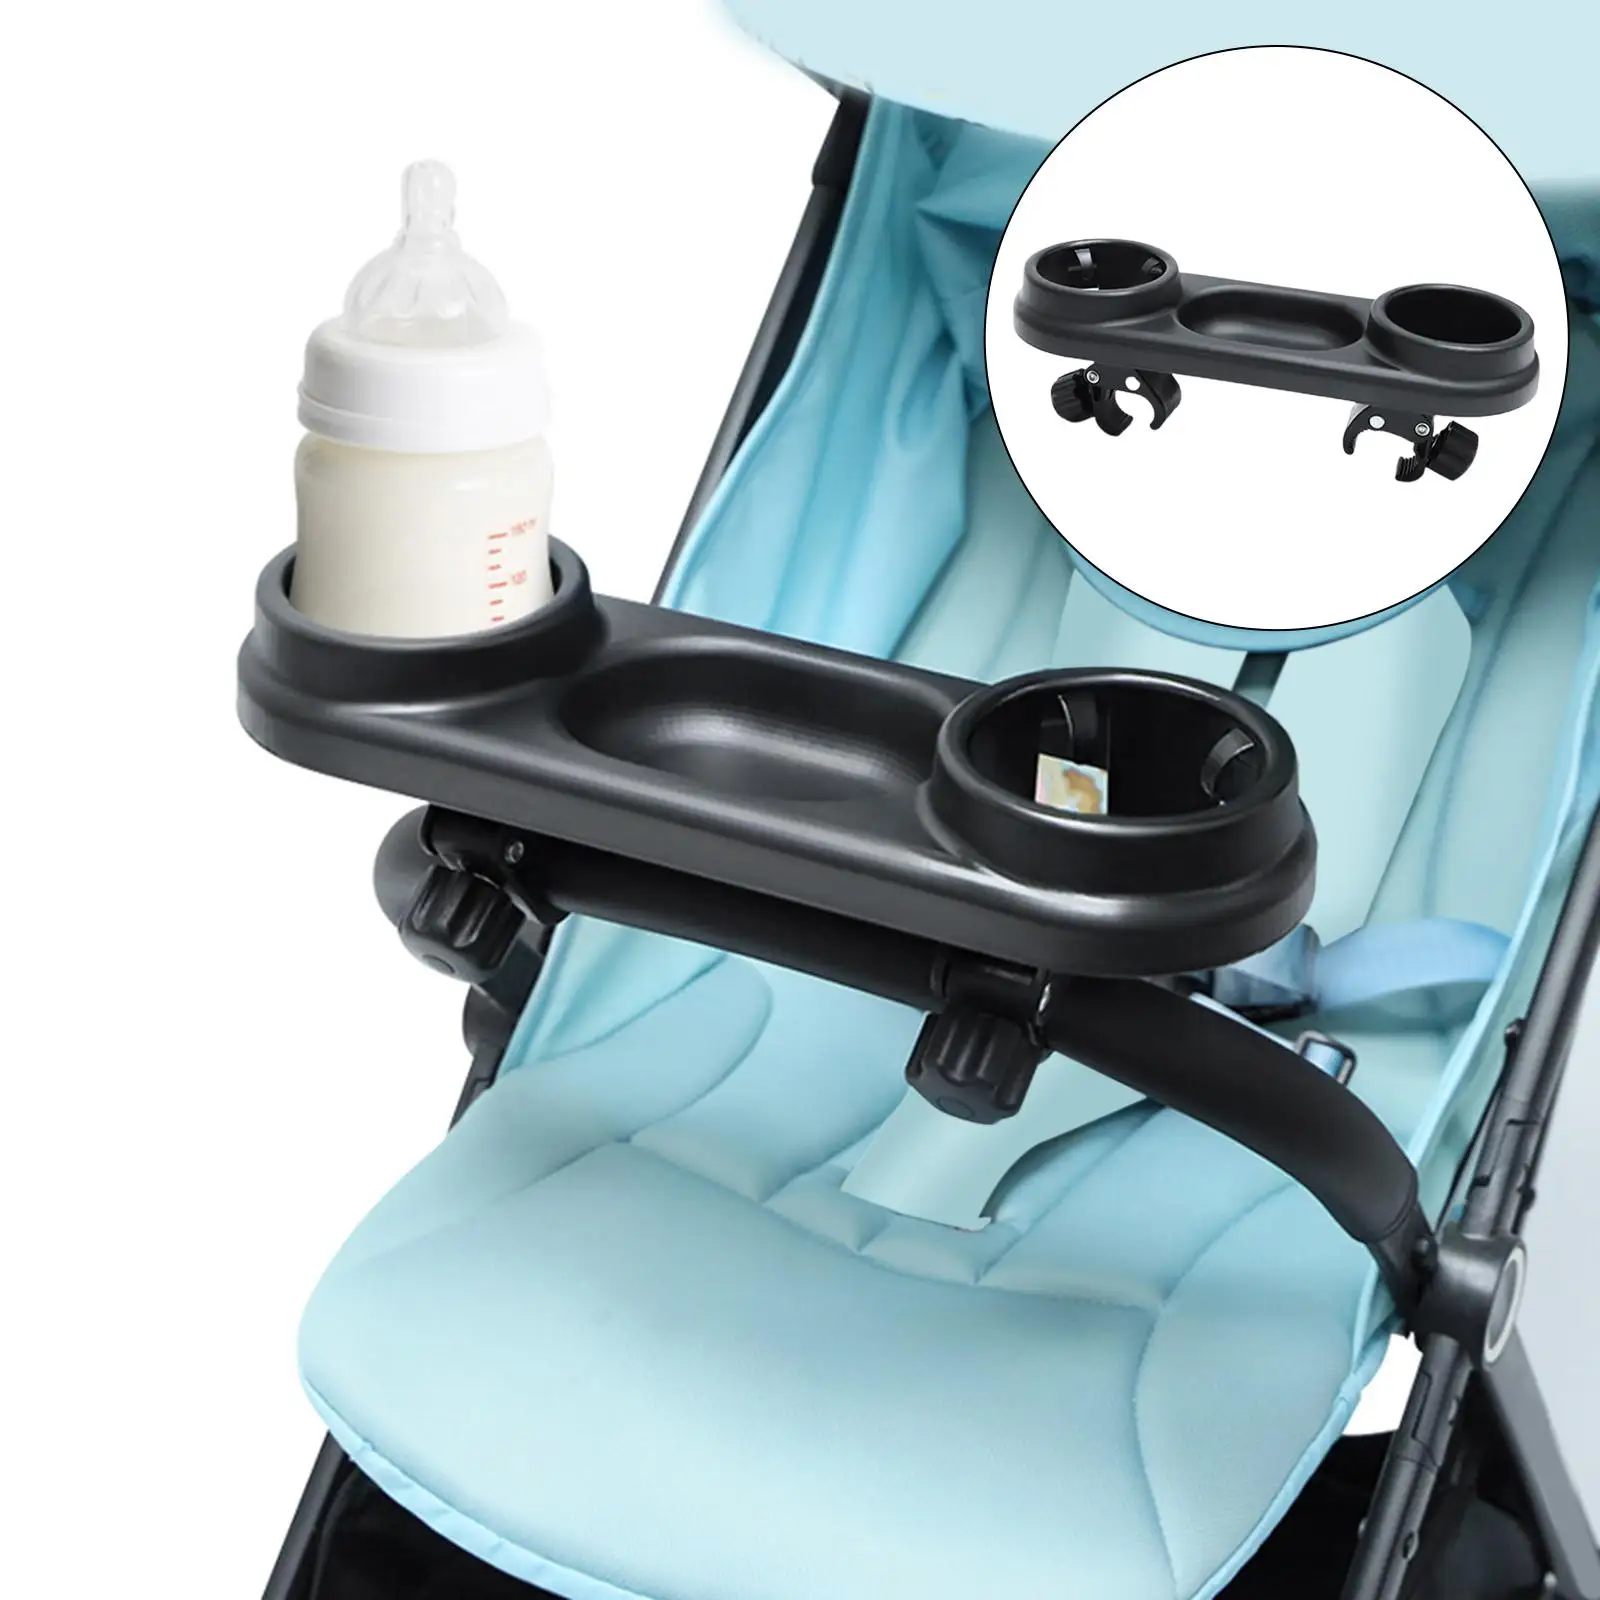 Stroller Tray Snack Tray and cup  Holder, Fits Most Types of Strollers with Armrests Durable Accessories Stable Fixation Grip